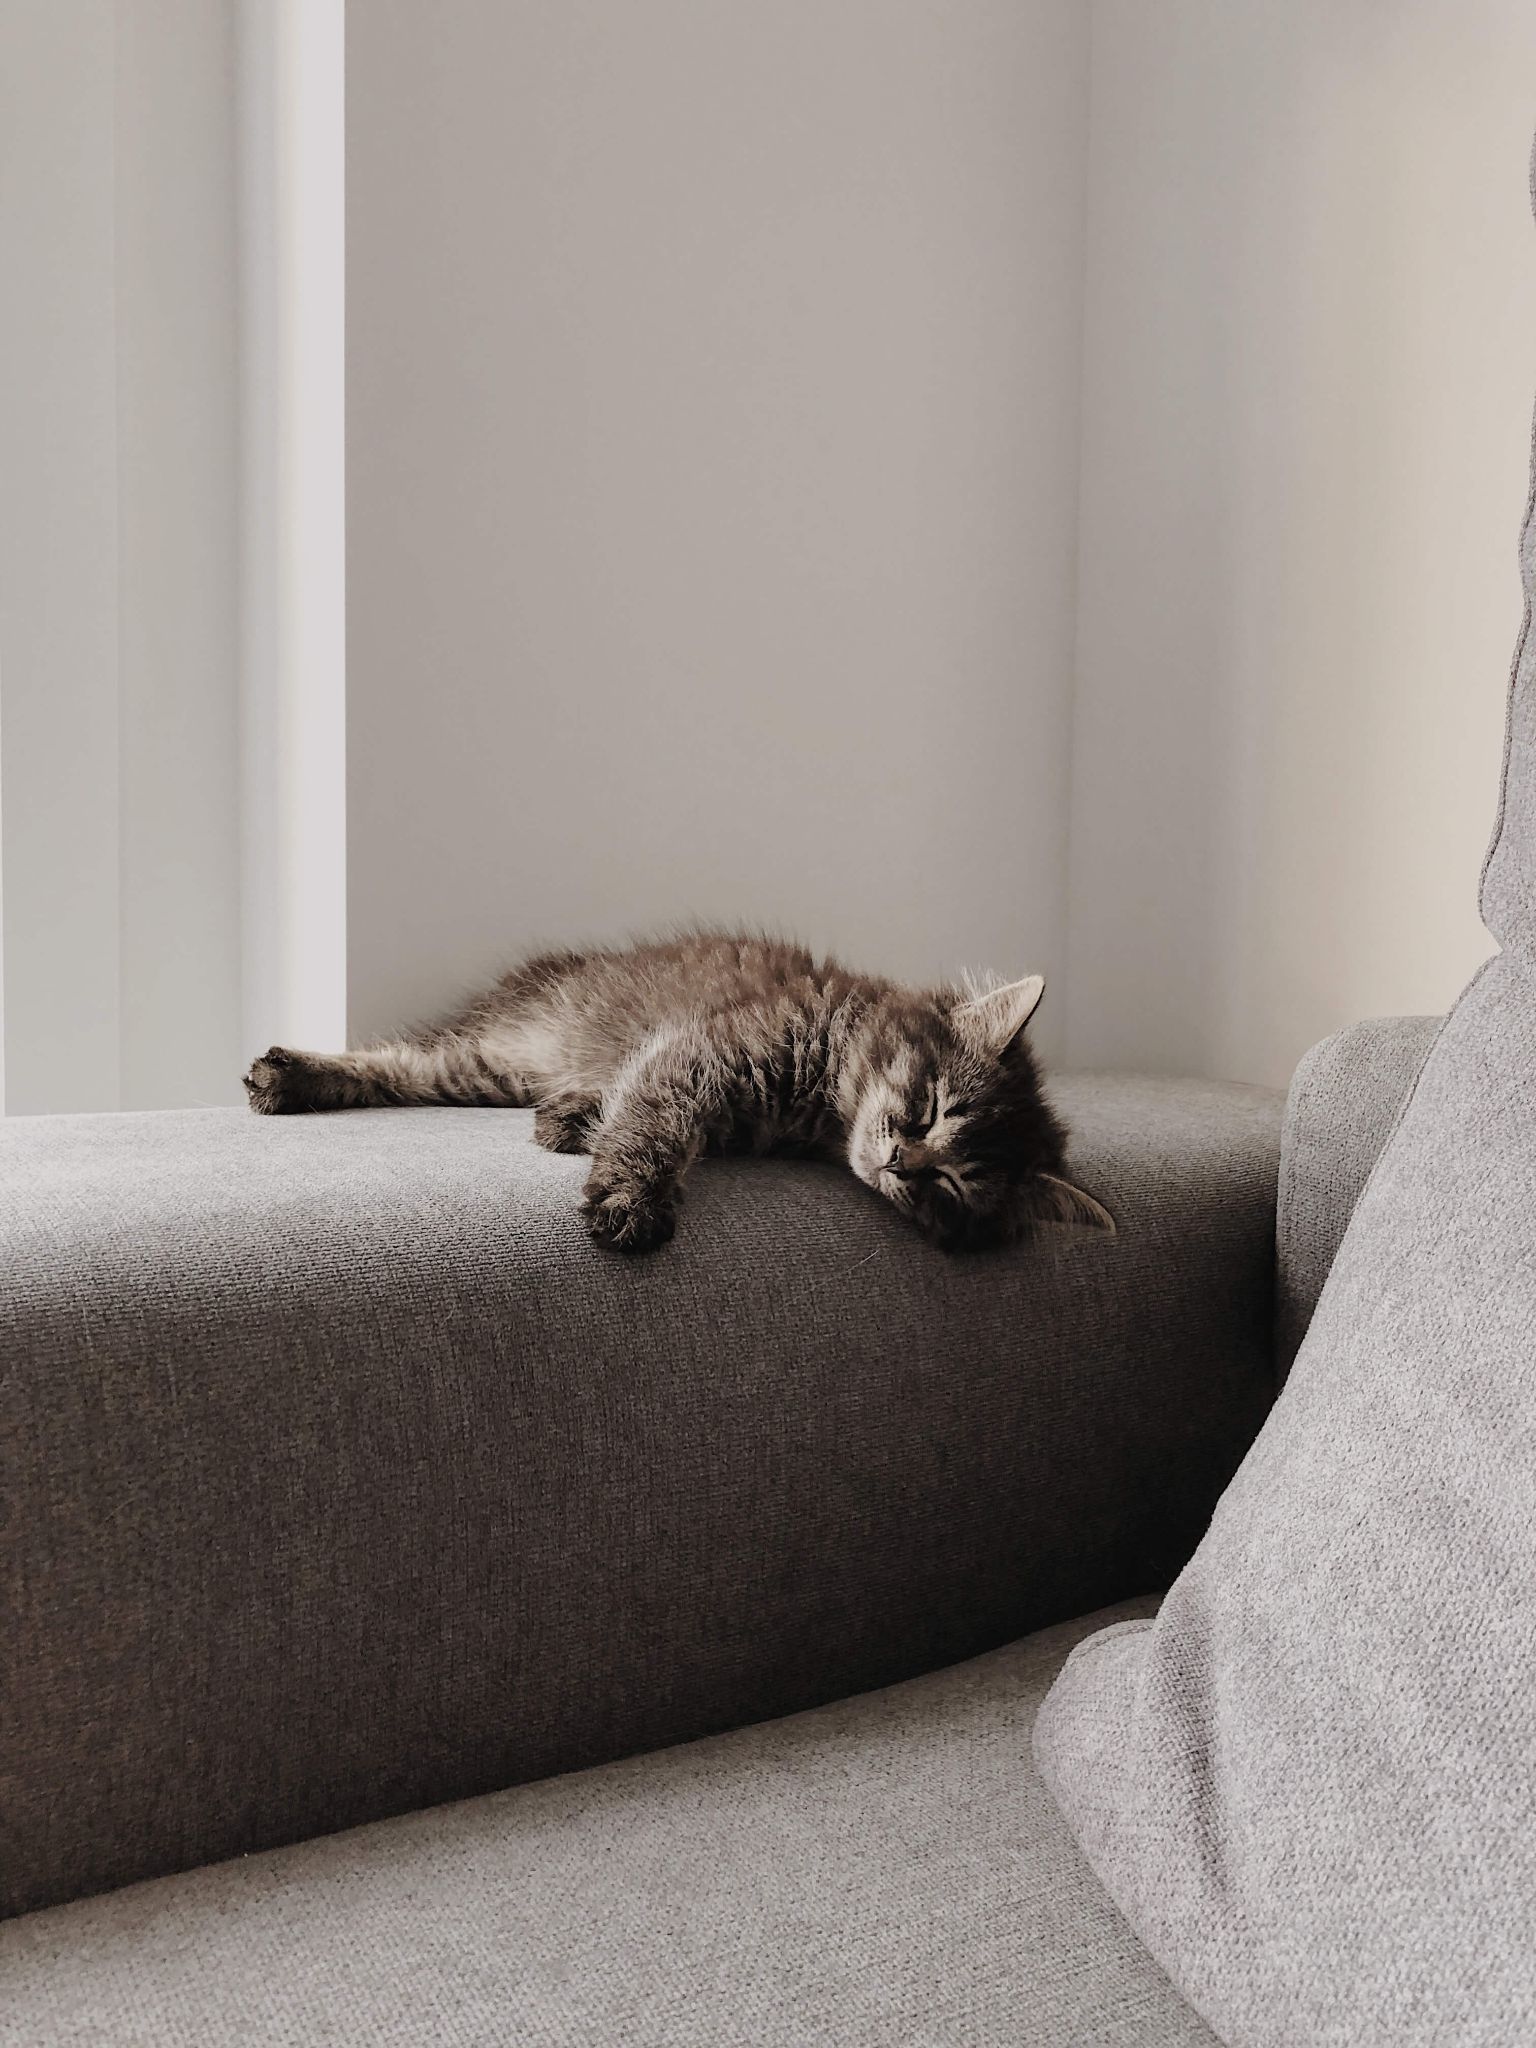 How to fix cat scratches on a microfiber couch